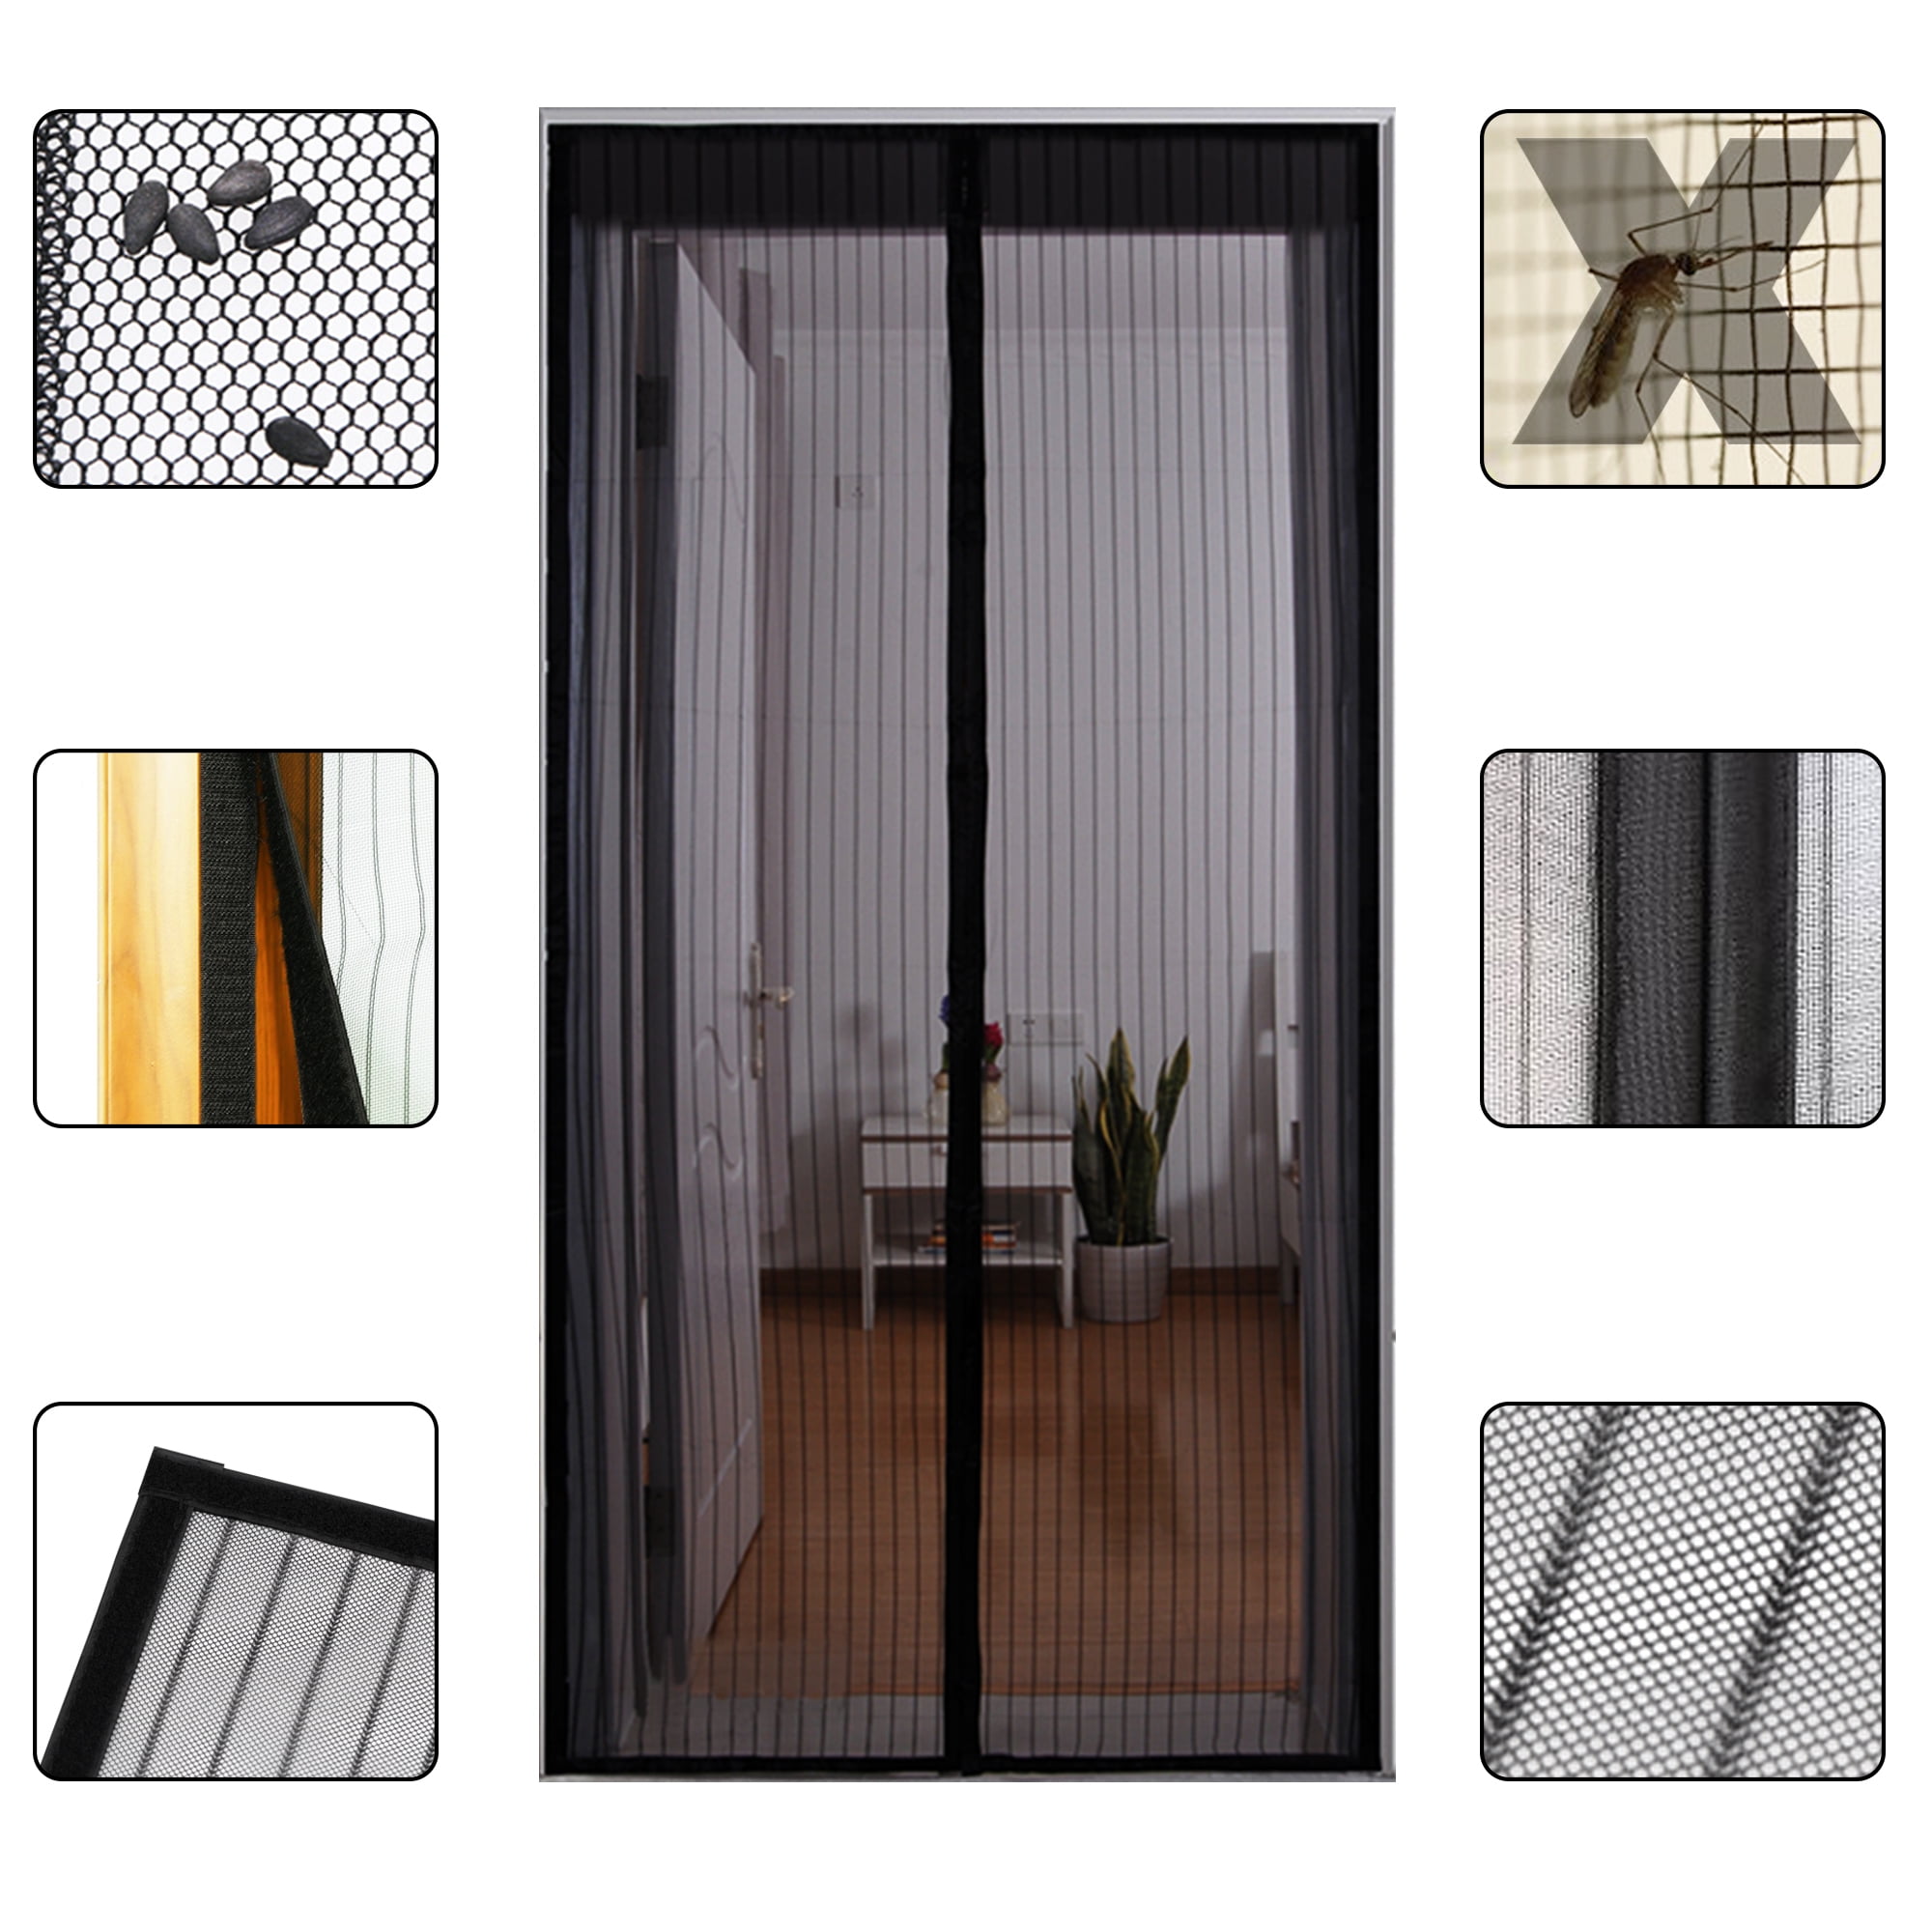 Pets Friendly Heavy Duty Kit Mosquito Strip Door Curtain Netting Mesh up to 95x220 with Sticky Velcro. Screen Door Four Pieces Curtain Anti Mosquito Bug Fly Insect